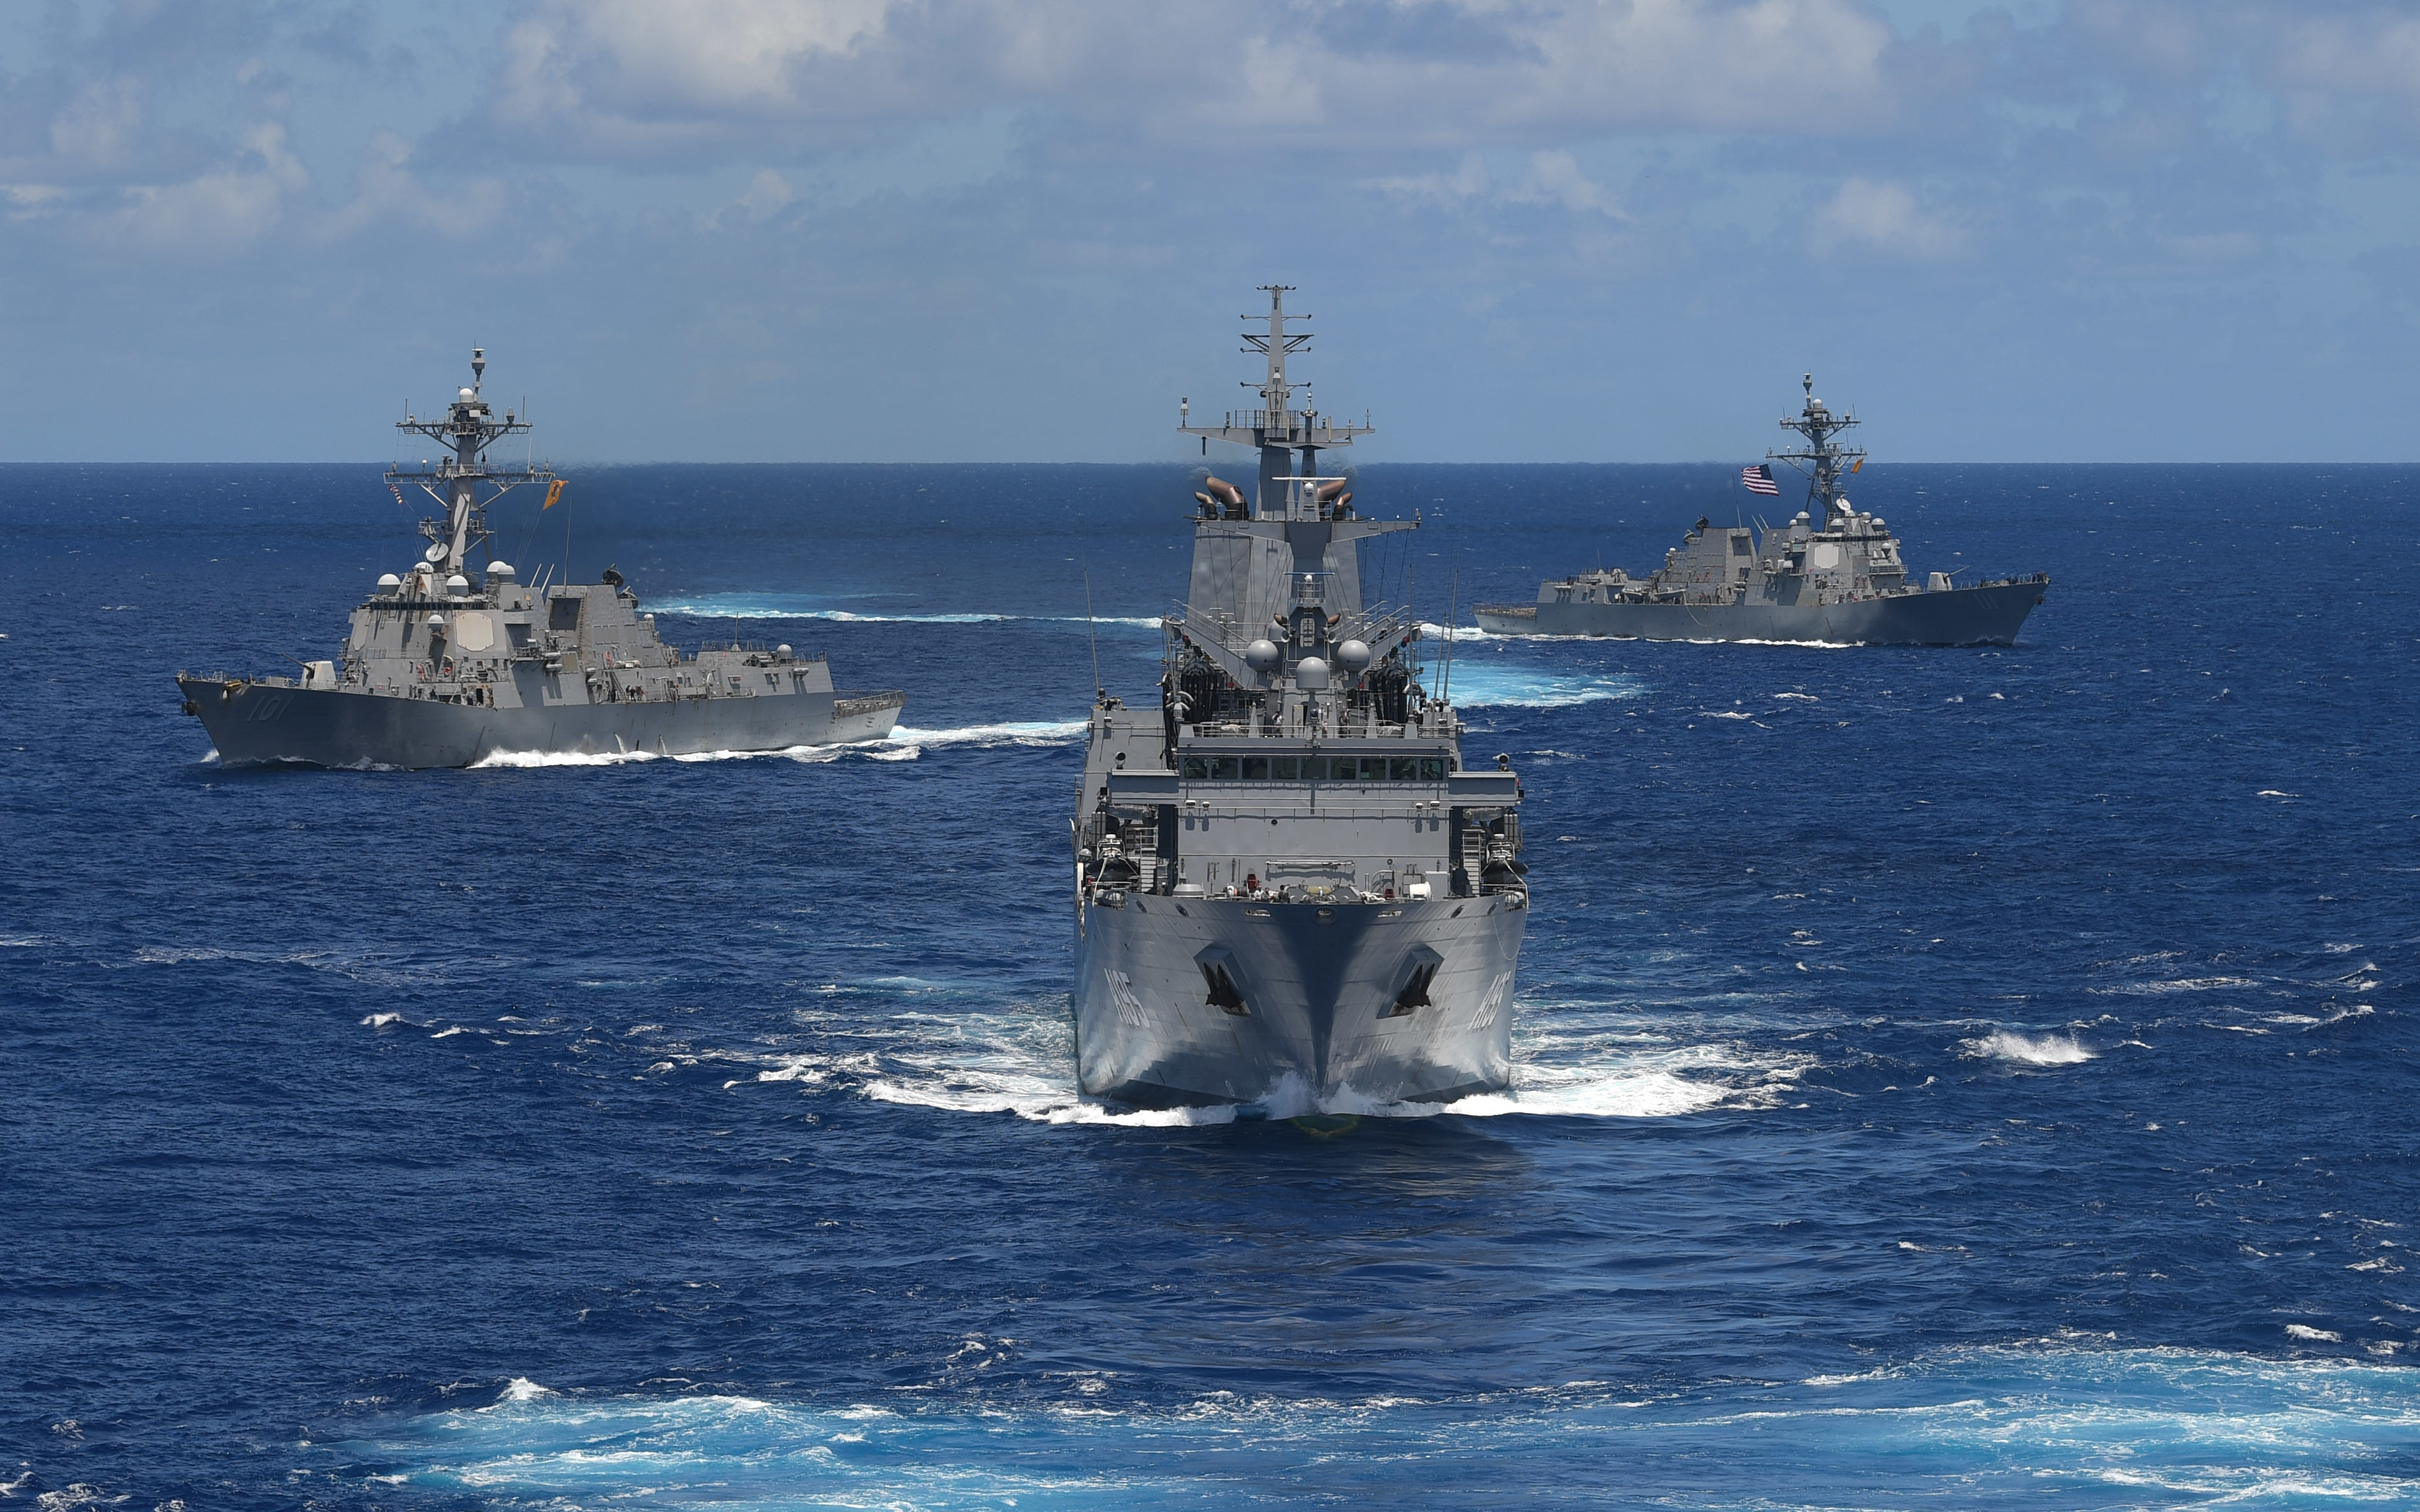 The contest over the South China Sea is not limited to local parties, with the strategic waterway regarded by the US as critical to its Indo-Pacific strategy. Photo: US Navy